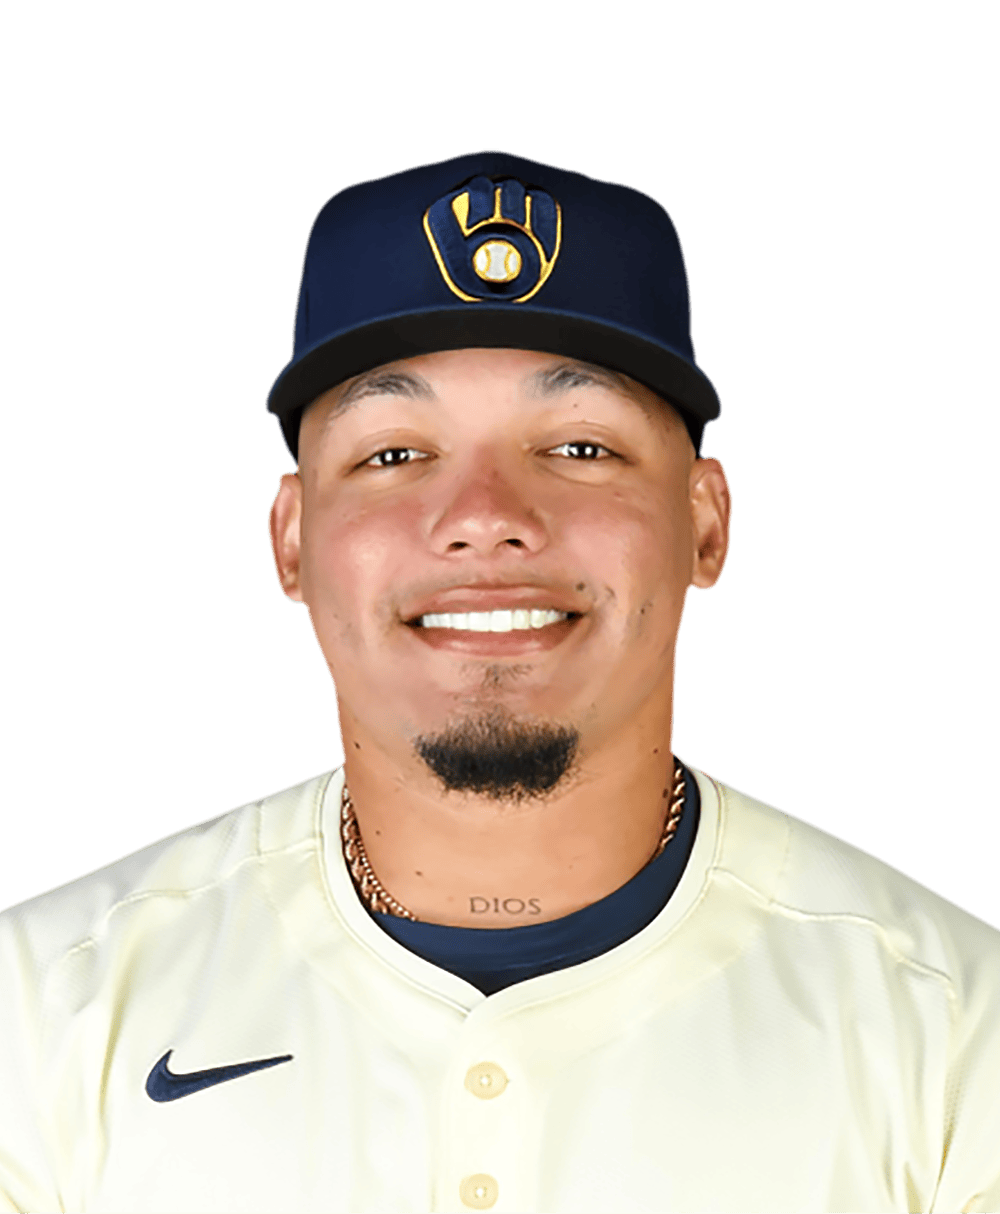 William Contreras caps 3-run 7th with winning RBI in Brewers' 3-2